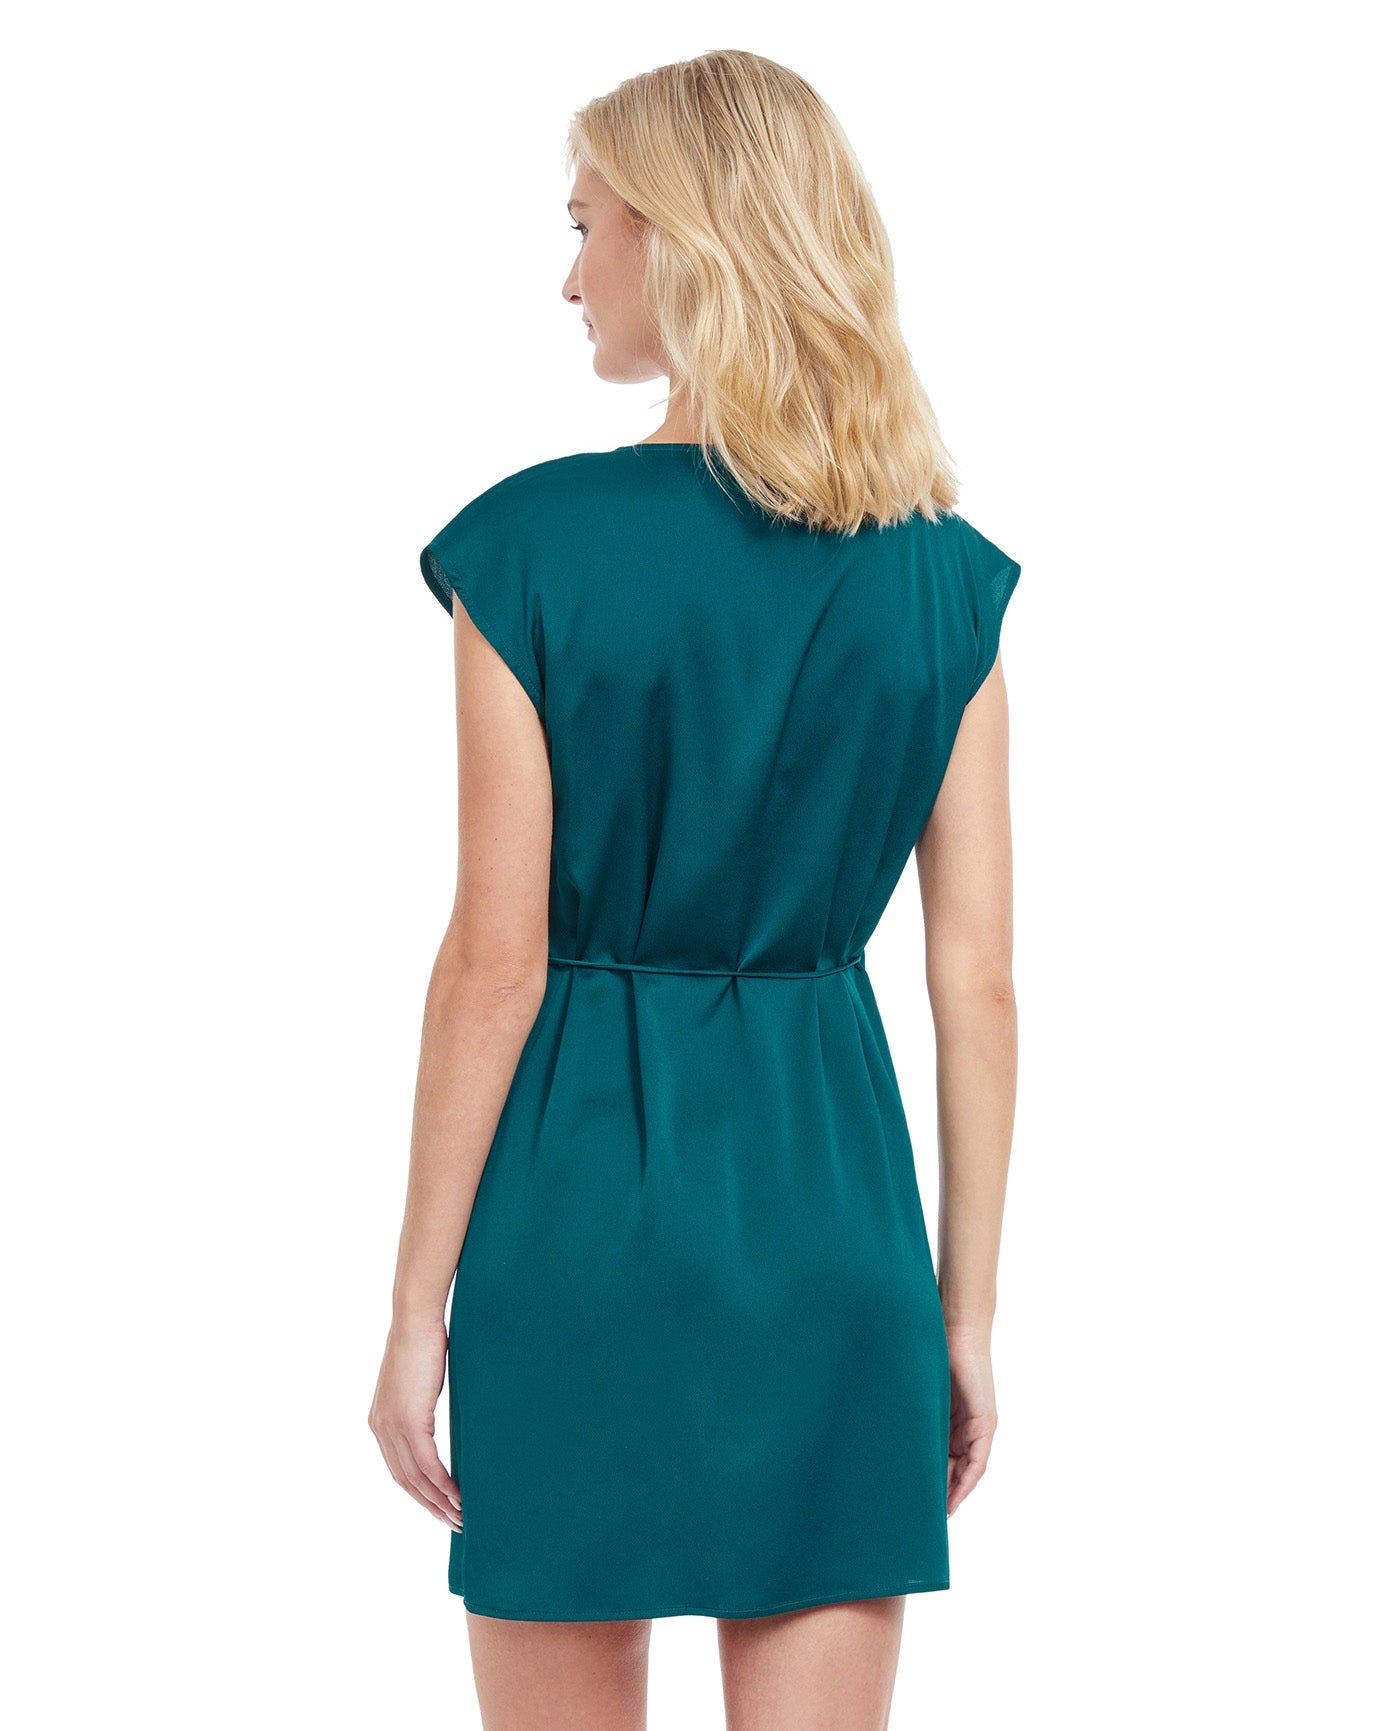 Back View Of Gottex Classic Modern Shades Surplice Wrap Cover Up Beach Dress | Gottex Modern Shades Peacock Solid